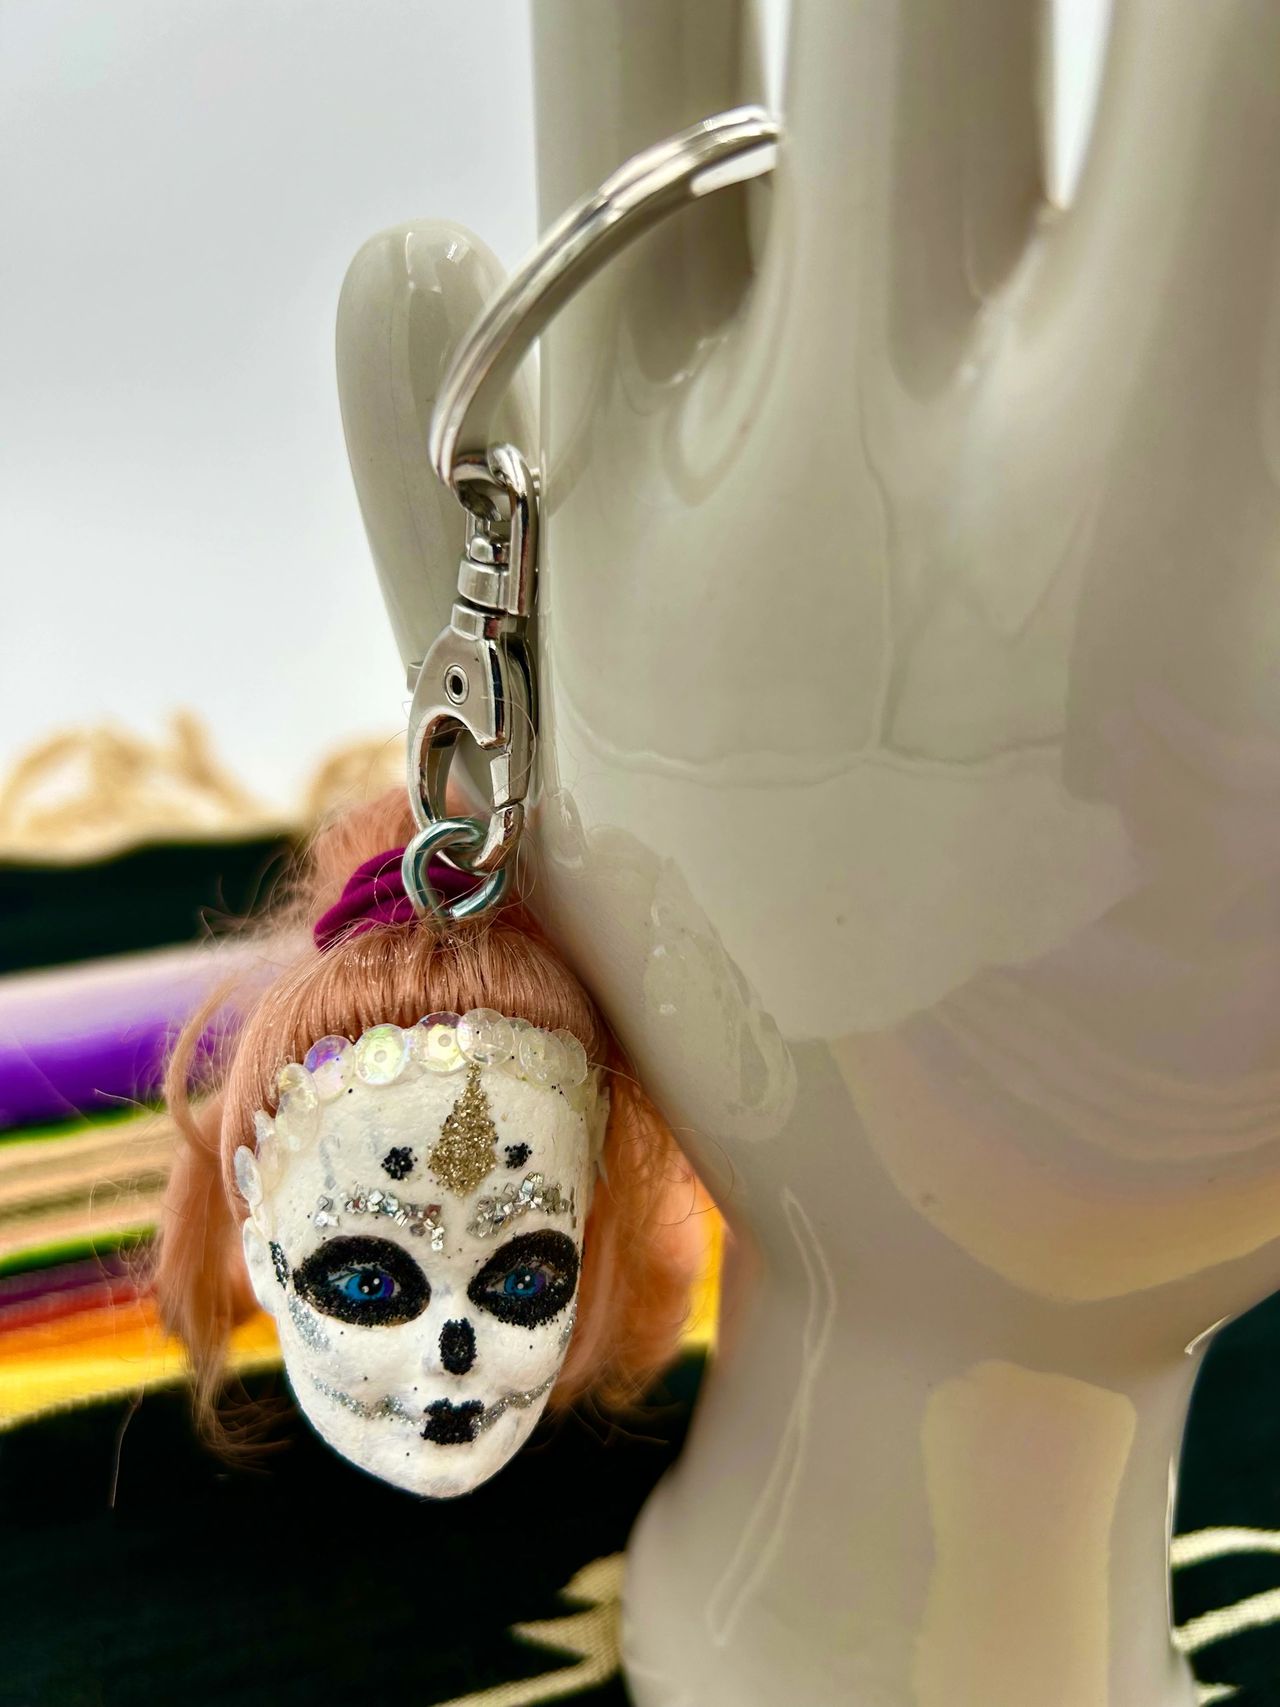 A painted Barbie head key chain hanging off a porcelain hand.